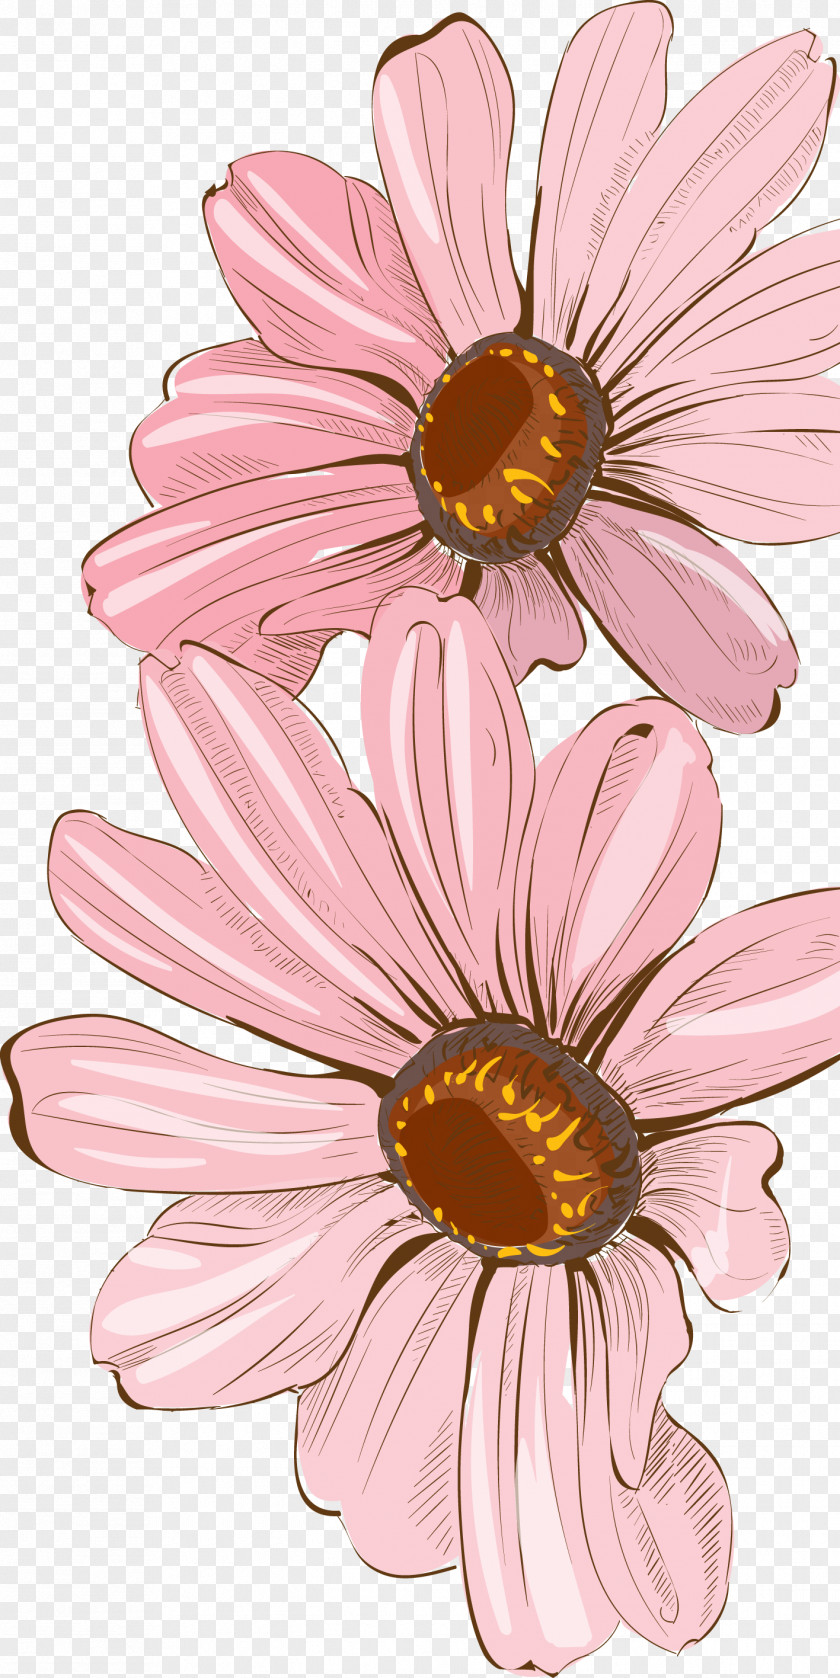 Fresh Watercolor Painted Floral Decoration Drawing Painting Design PNG